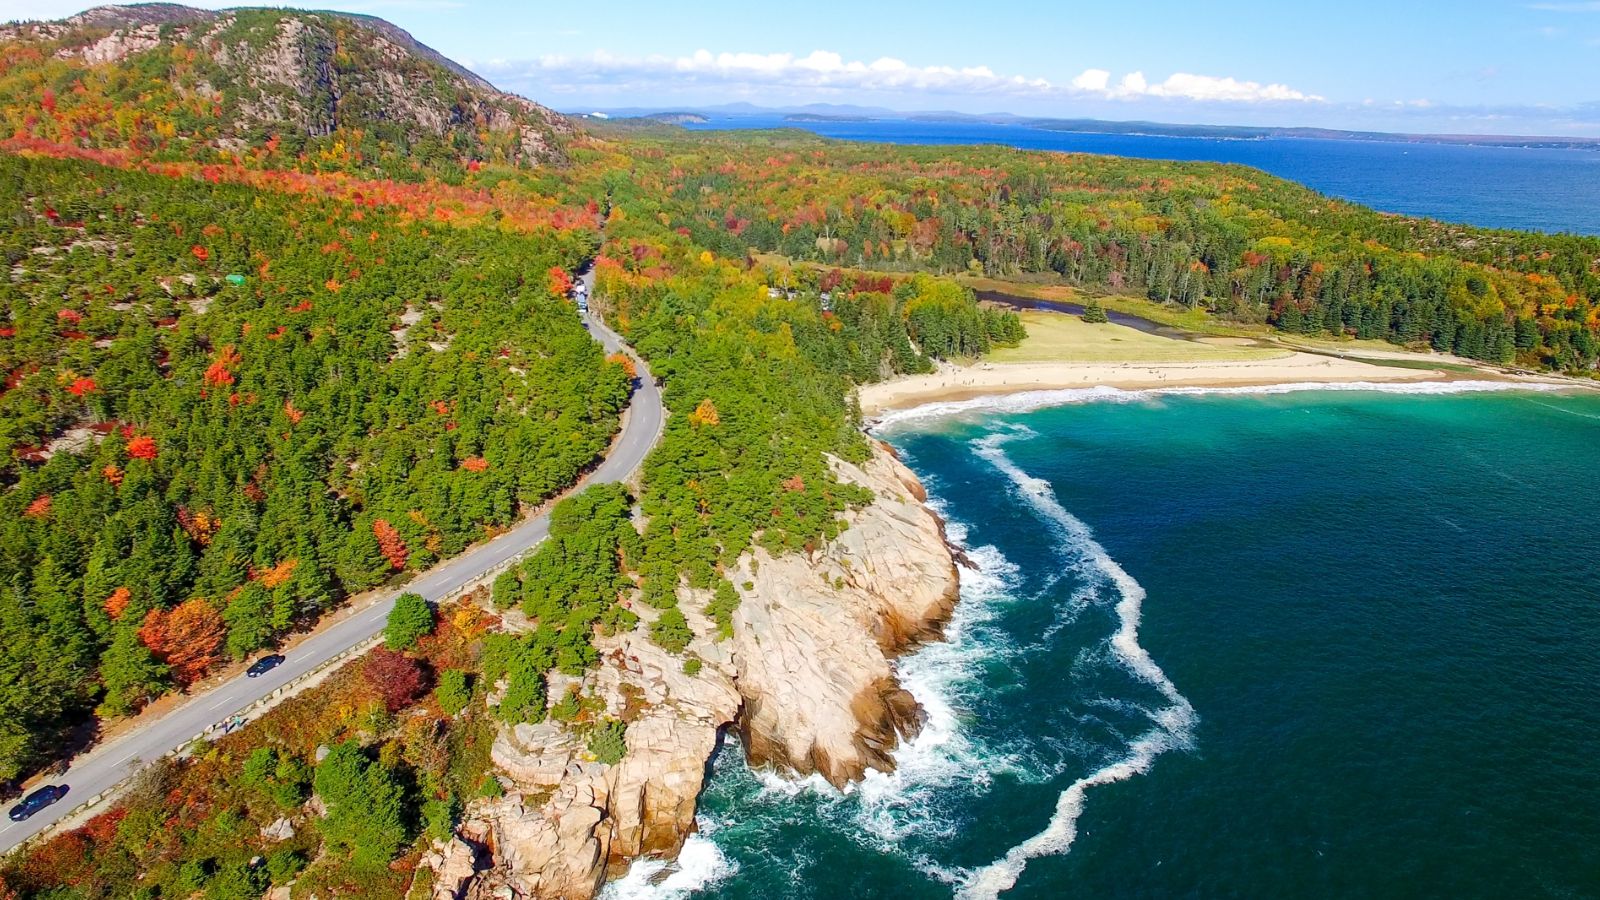 <p>Acadia National Park in Maine is known for its cobble beaches, exposed granite domes, and U-shaped valleys. The <a href="https://www.nps.gov/acad/planyourvisit/park-loop-road.htm">National Park Service </a>hails the 27-mile Park Loop Road as the “go-to scenic drive around the east side of Mount Desert Island, connecting Acadia’s lakes, mountains, and shoreline.”</p>